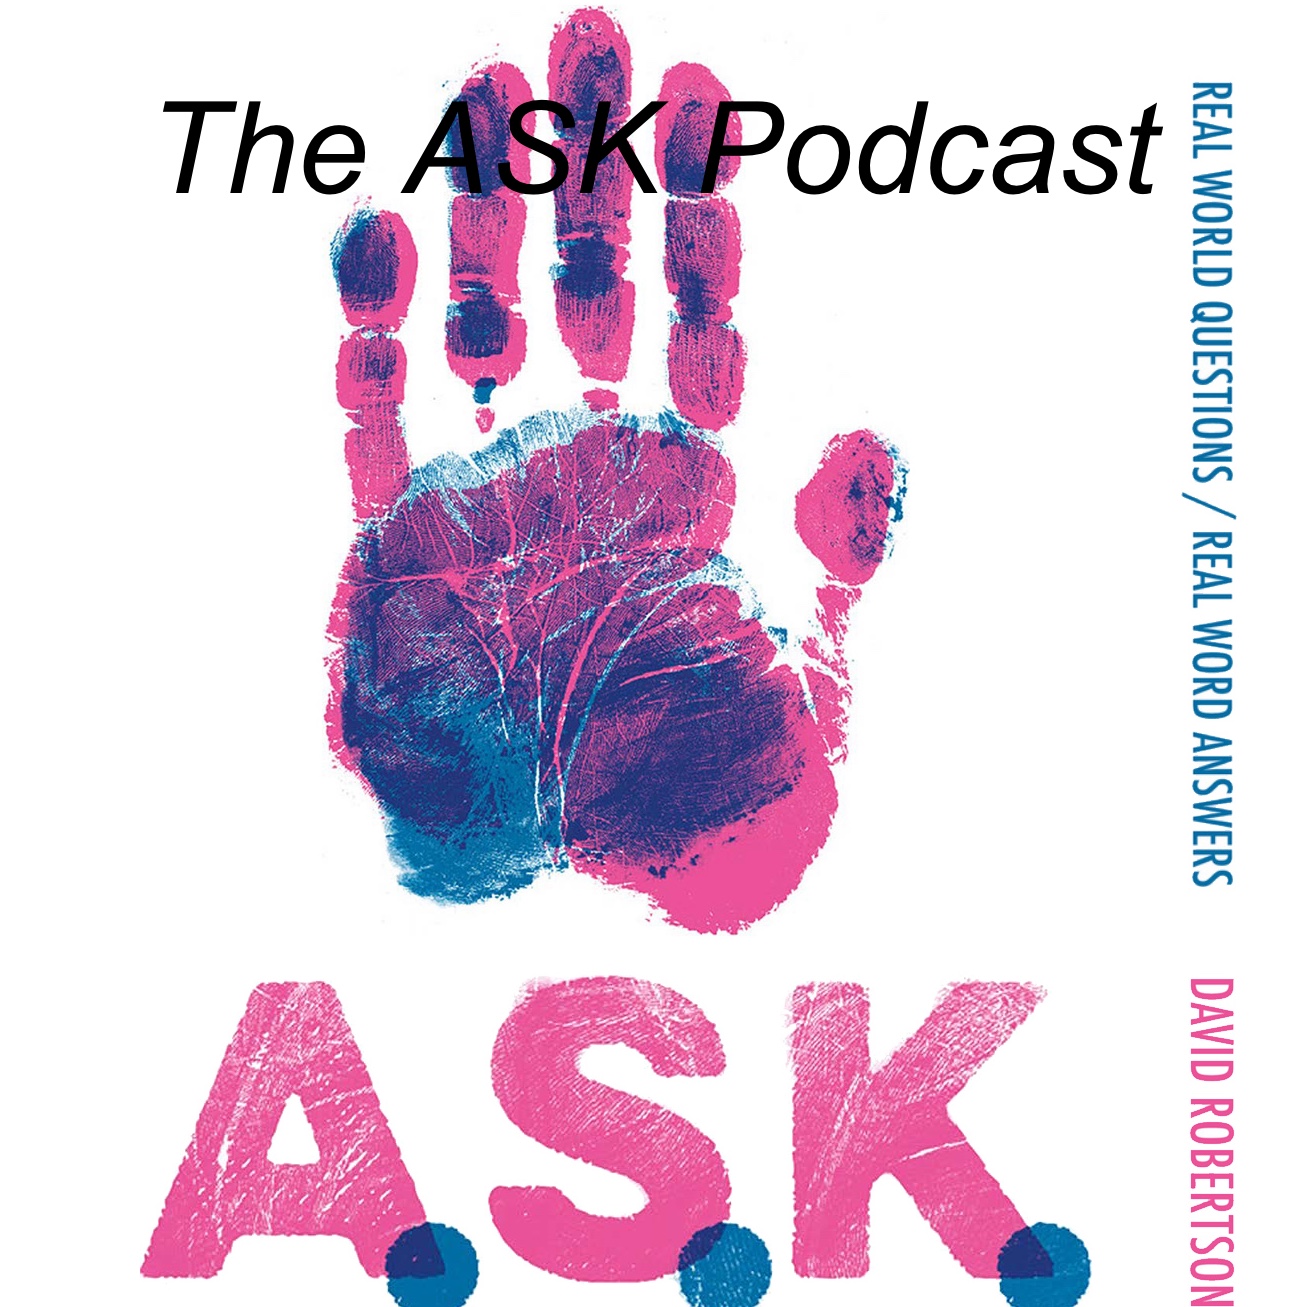 The ASK Podcast